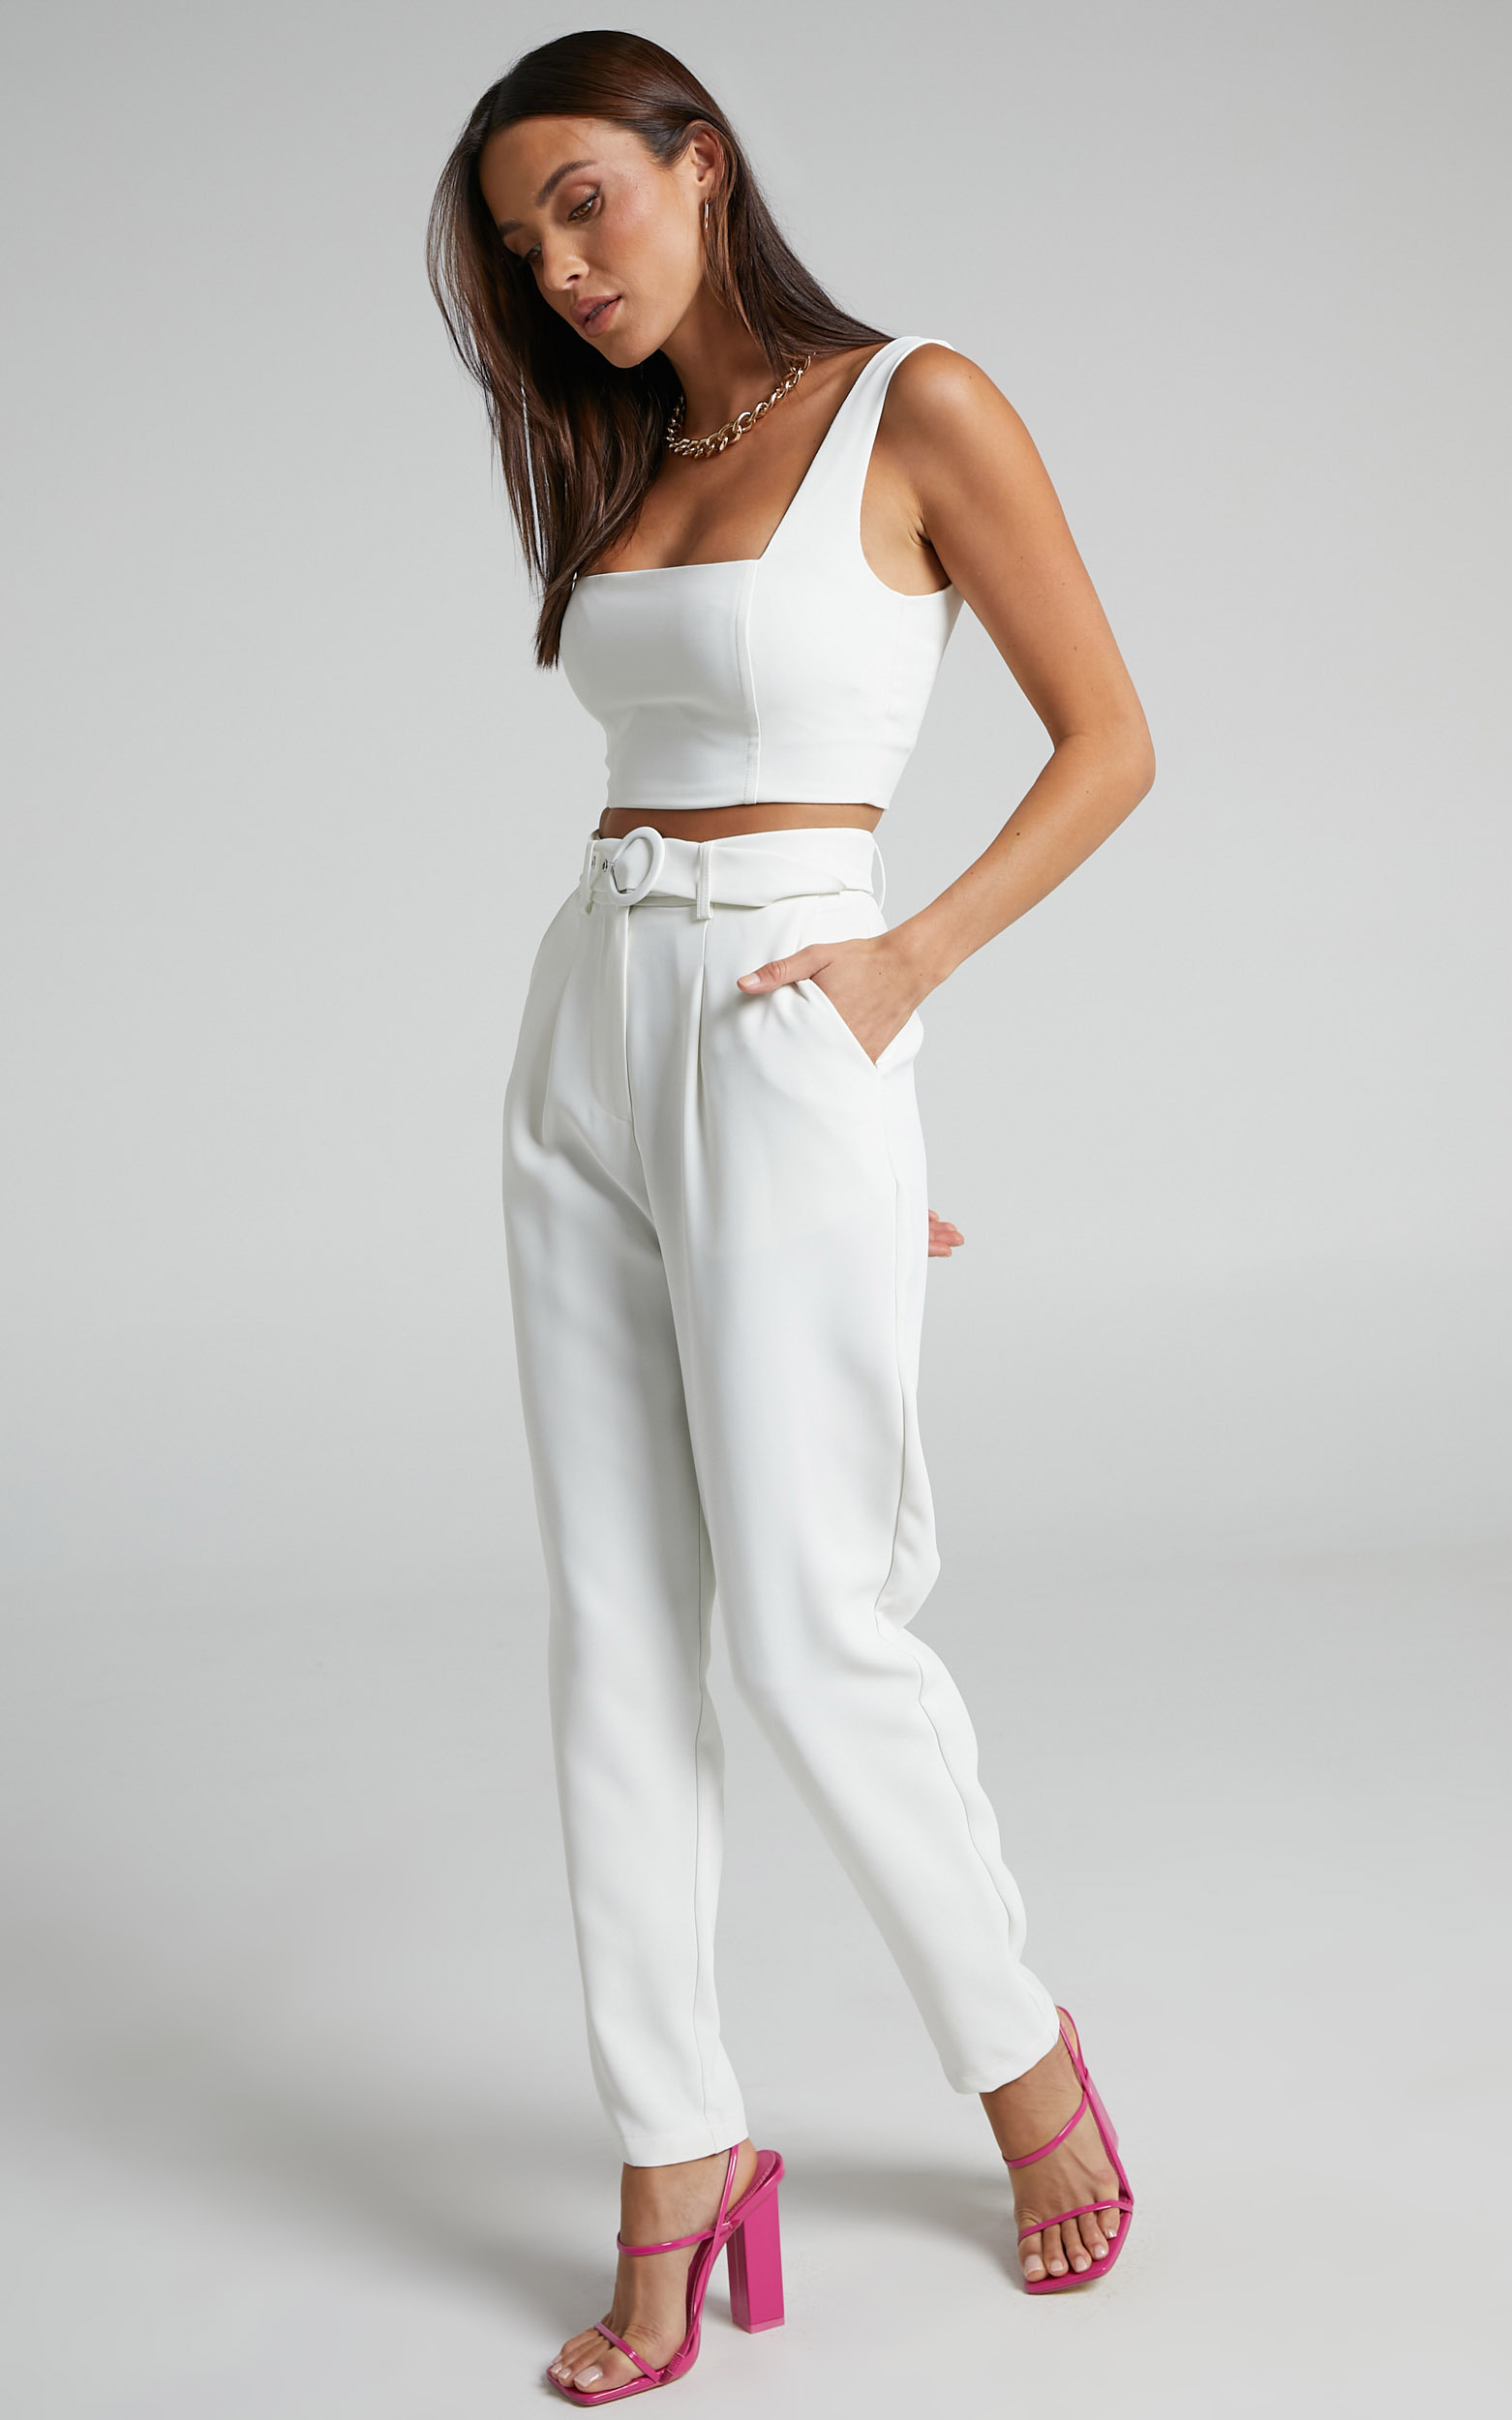 Reyna Two Piece Set - Crop Top and Tailored Pants in White - 04, WHT1, hi-res image number null